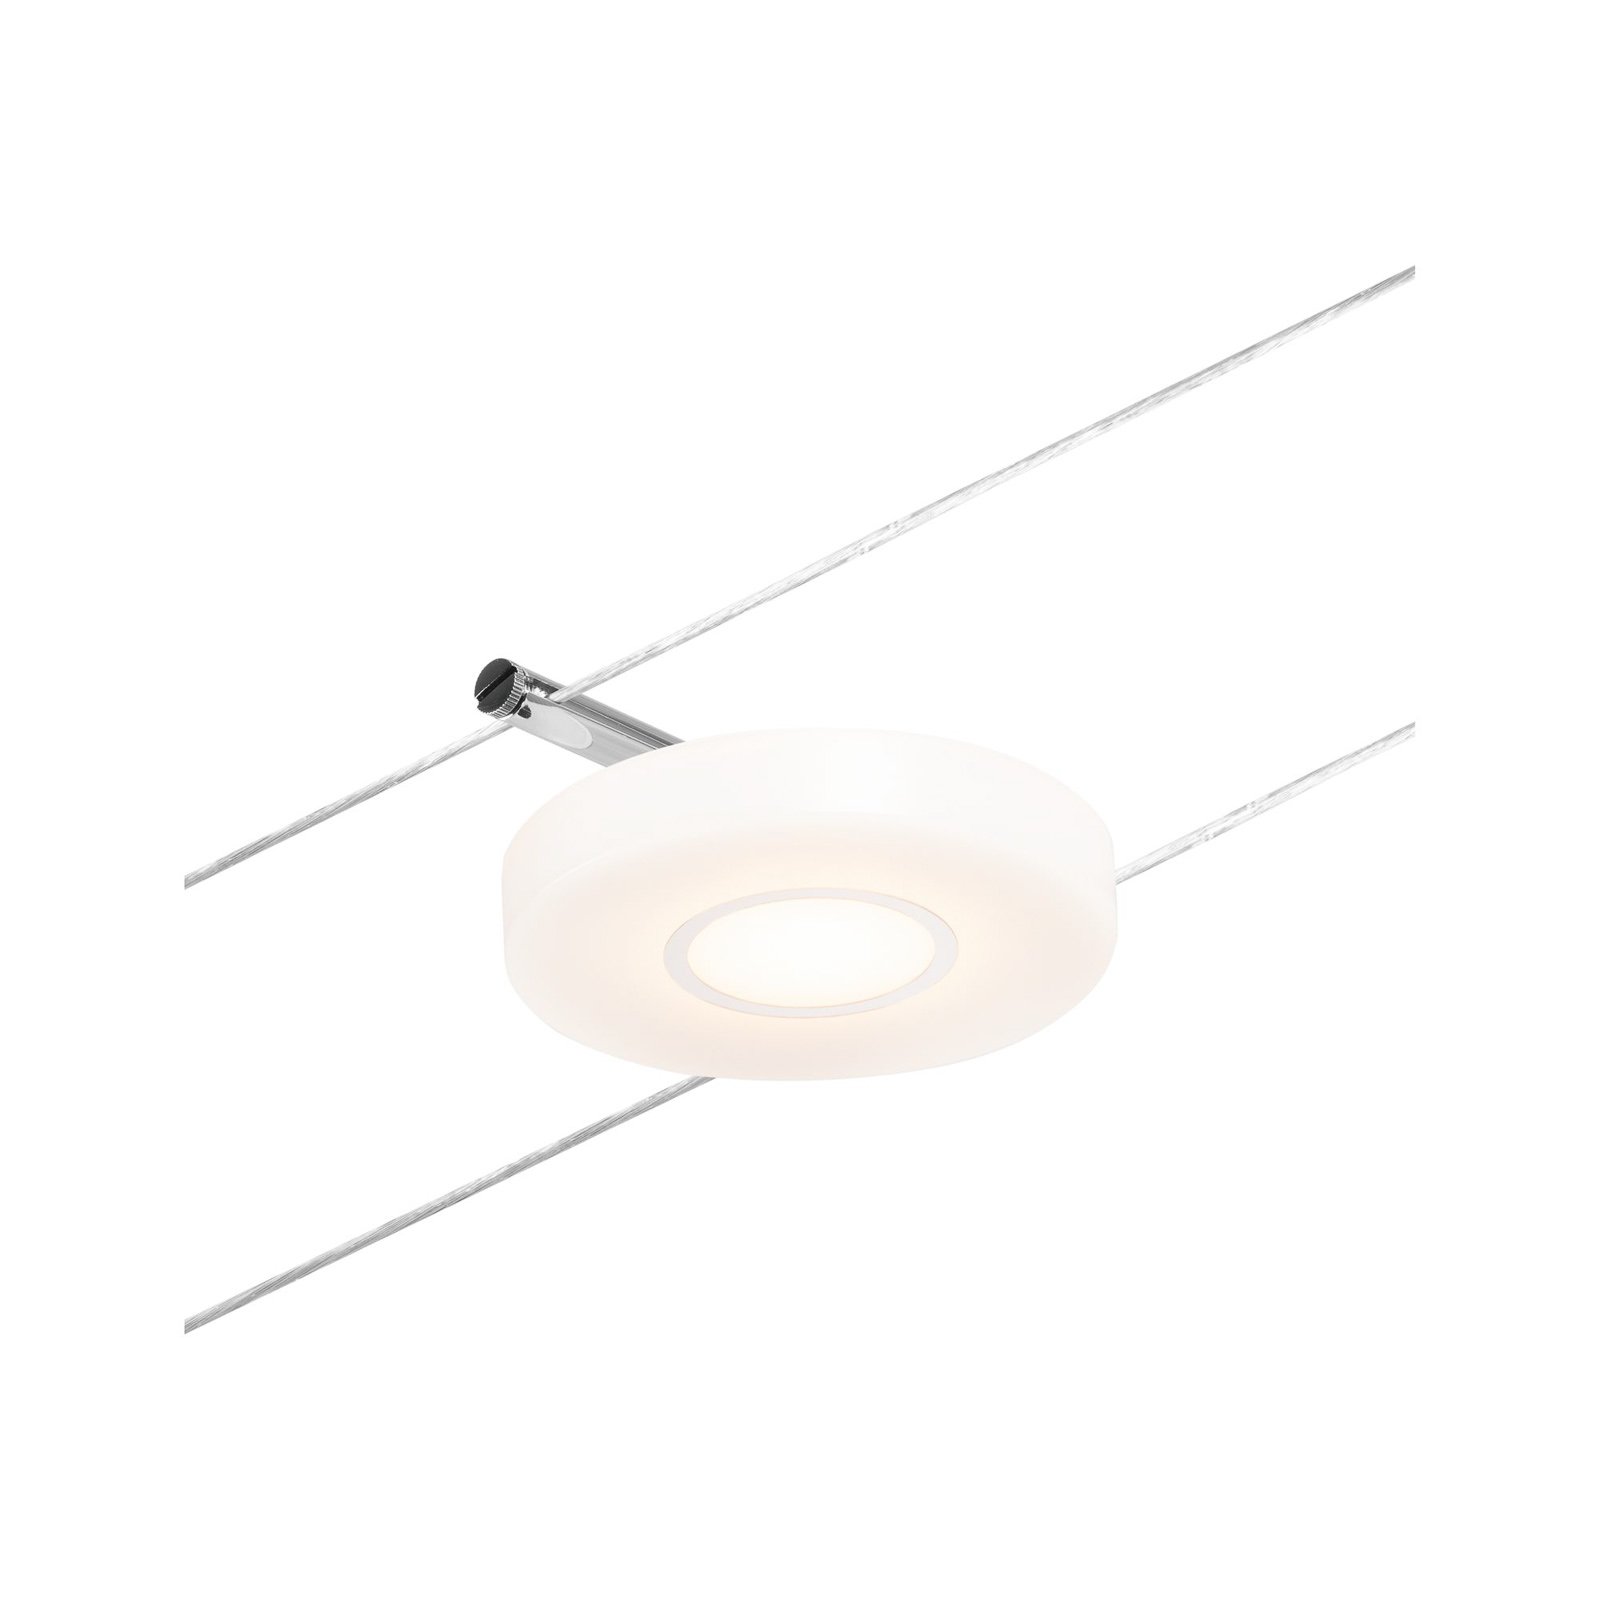 Paulmann Wire DiscLED foco LED sobre cable blanco